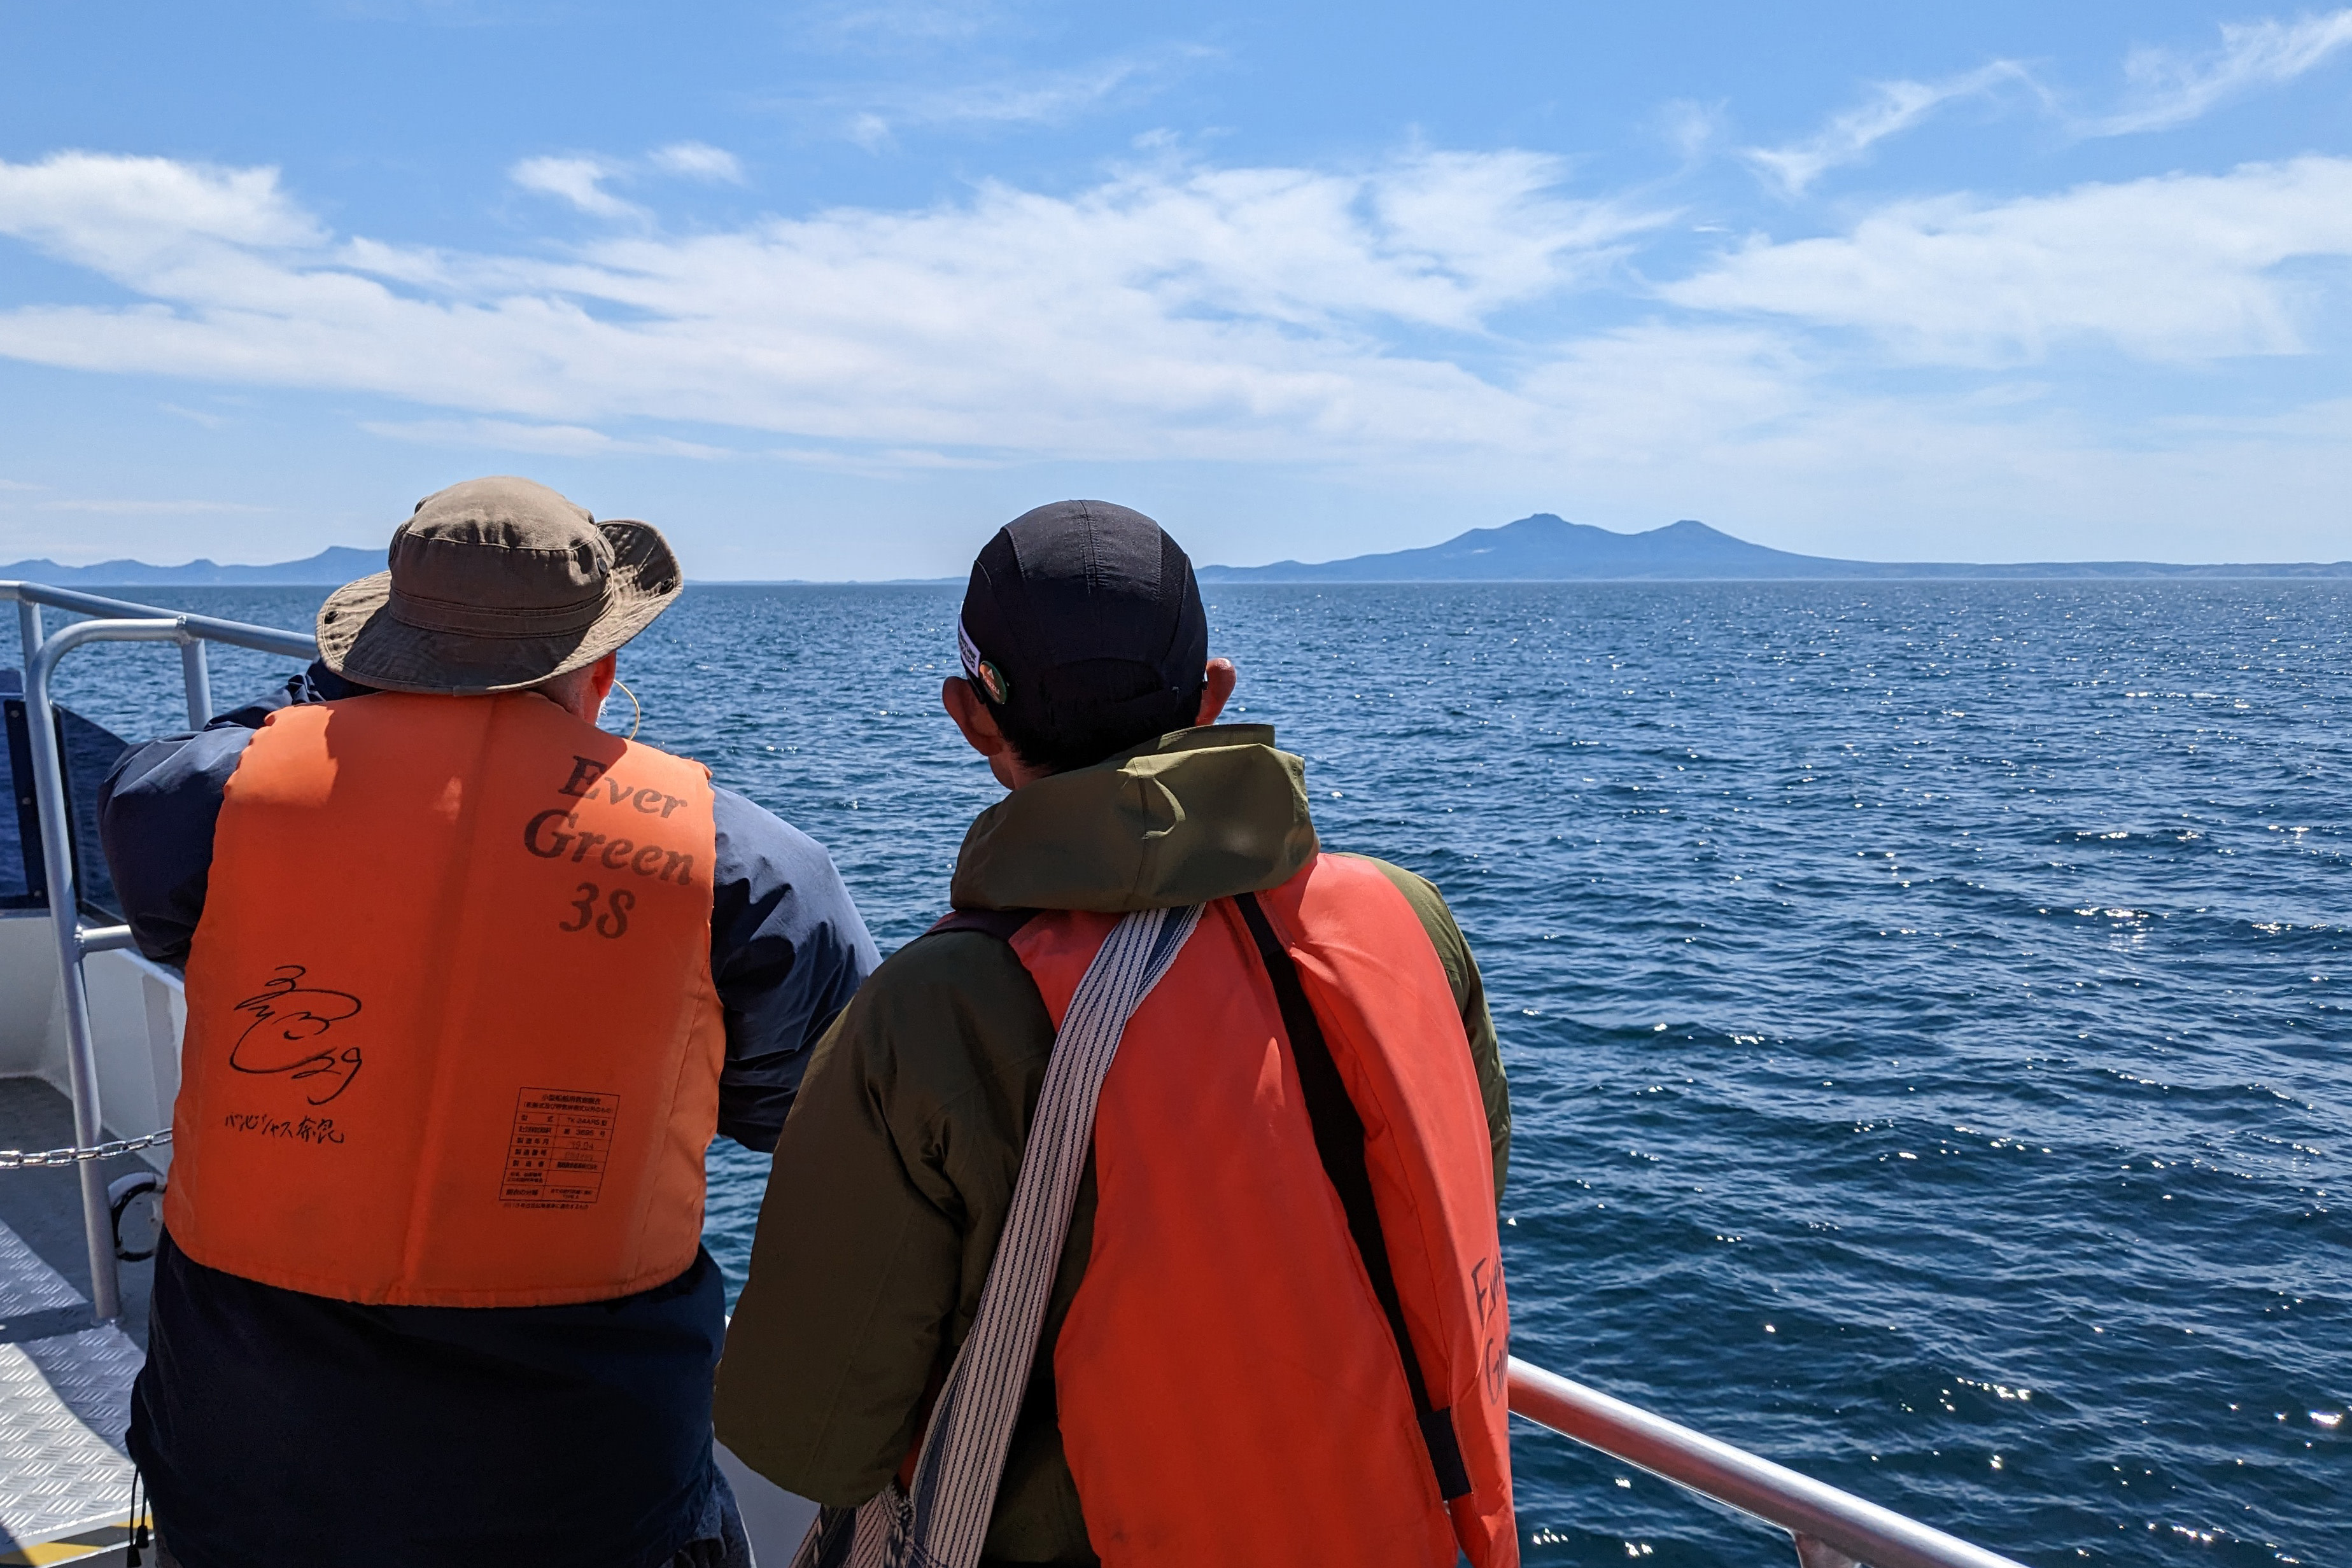 Two people scan the ocean for whales off the coast of the Shiretoko peninsula. There a a few white clouds in the sky and a mountain is seen in the distance.